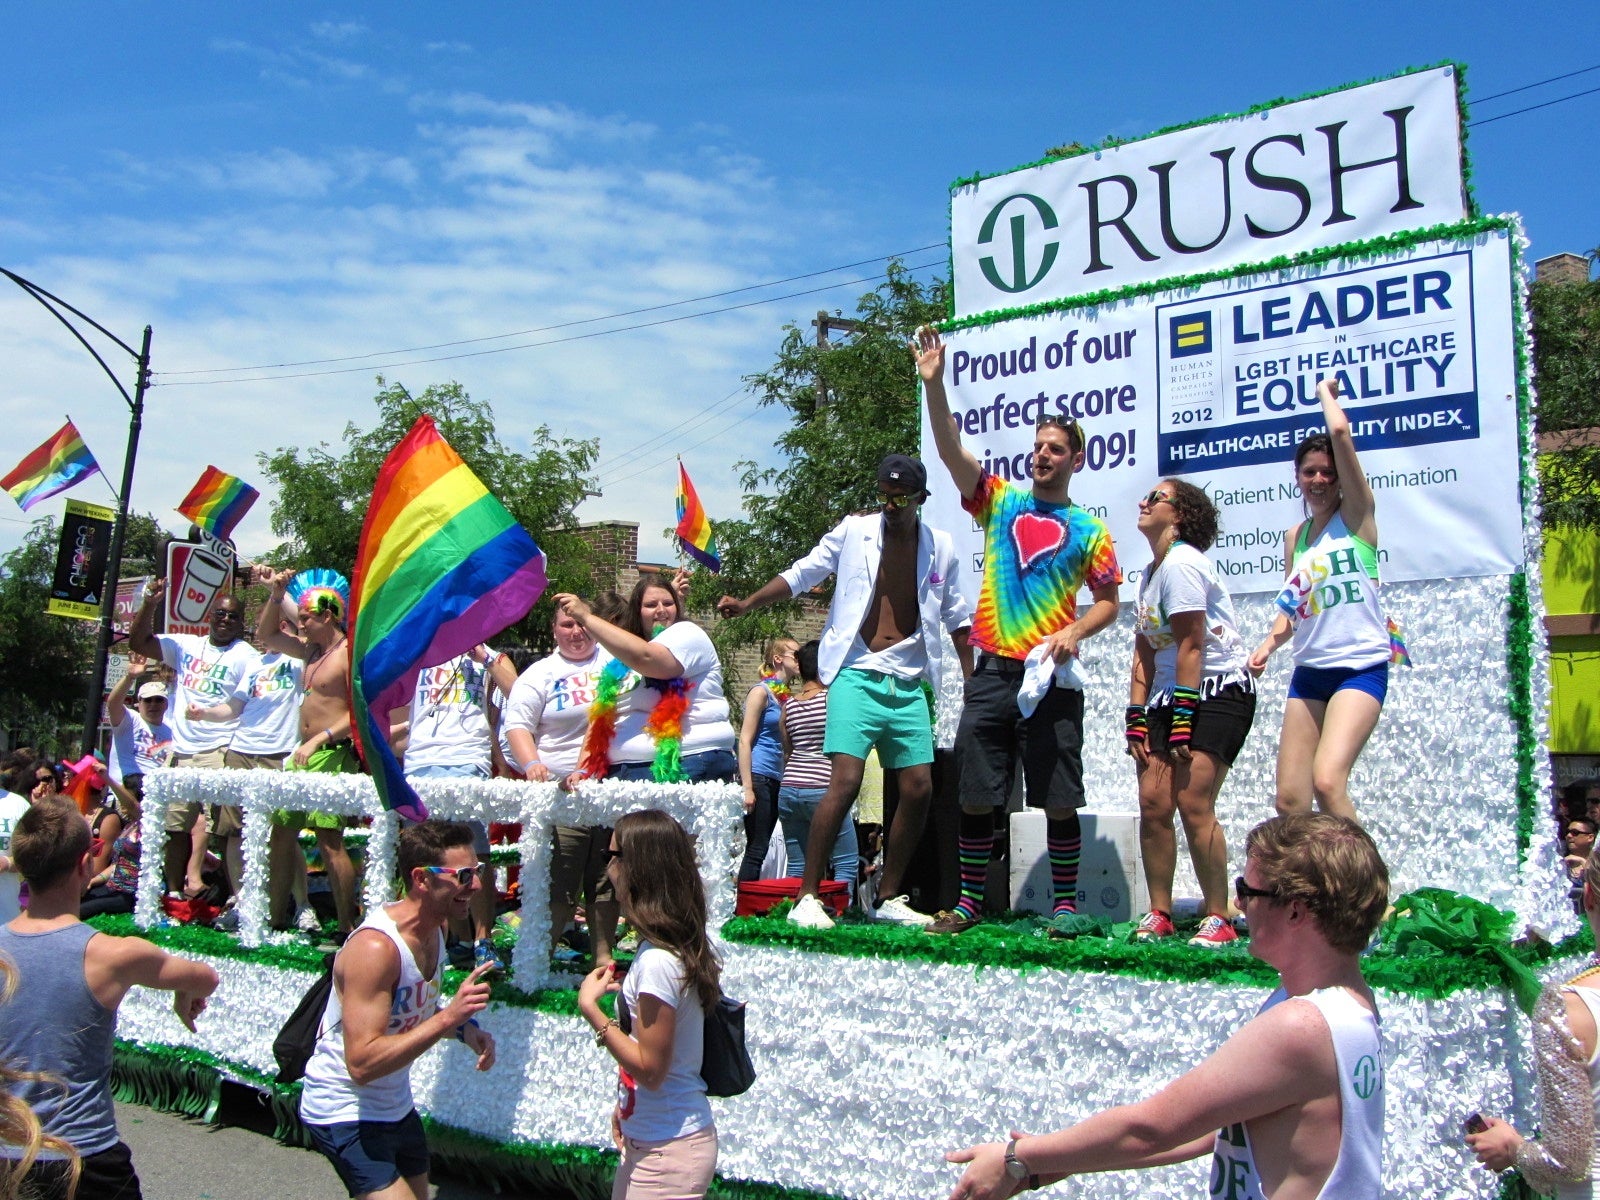 White float on pride parade with young people waving rainbow flags and the logo of the Rush University Hospital and signs that say: "Leader in LGBT Healthcare Equity" and "Proud of our Perfect Score since 2009"